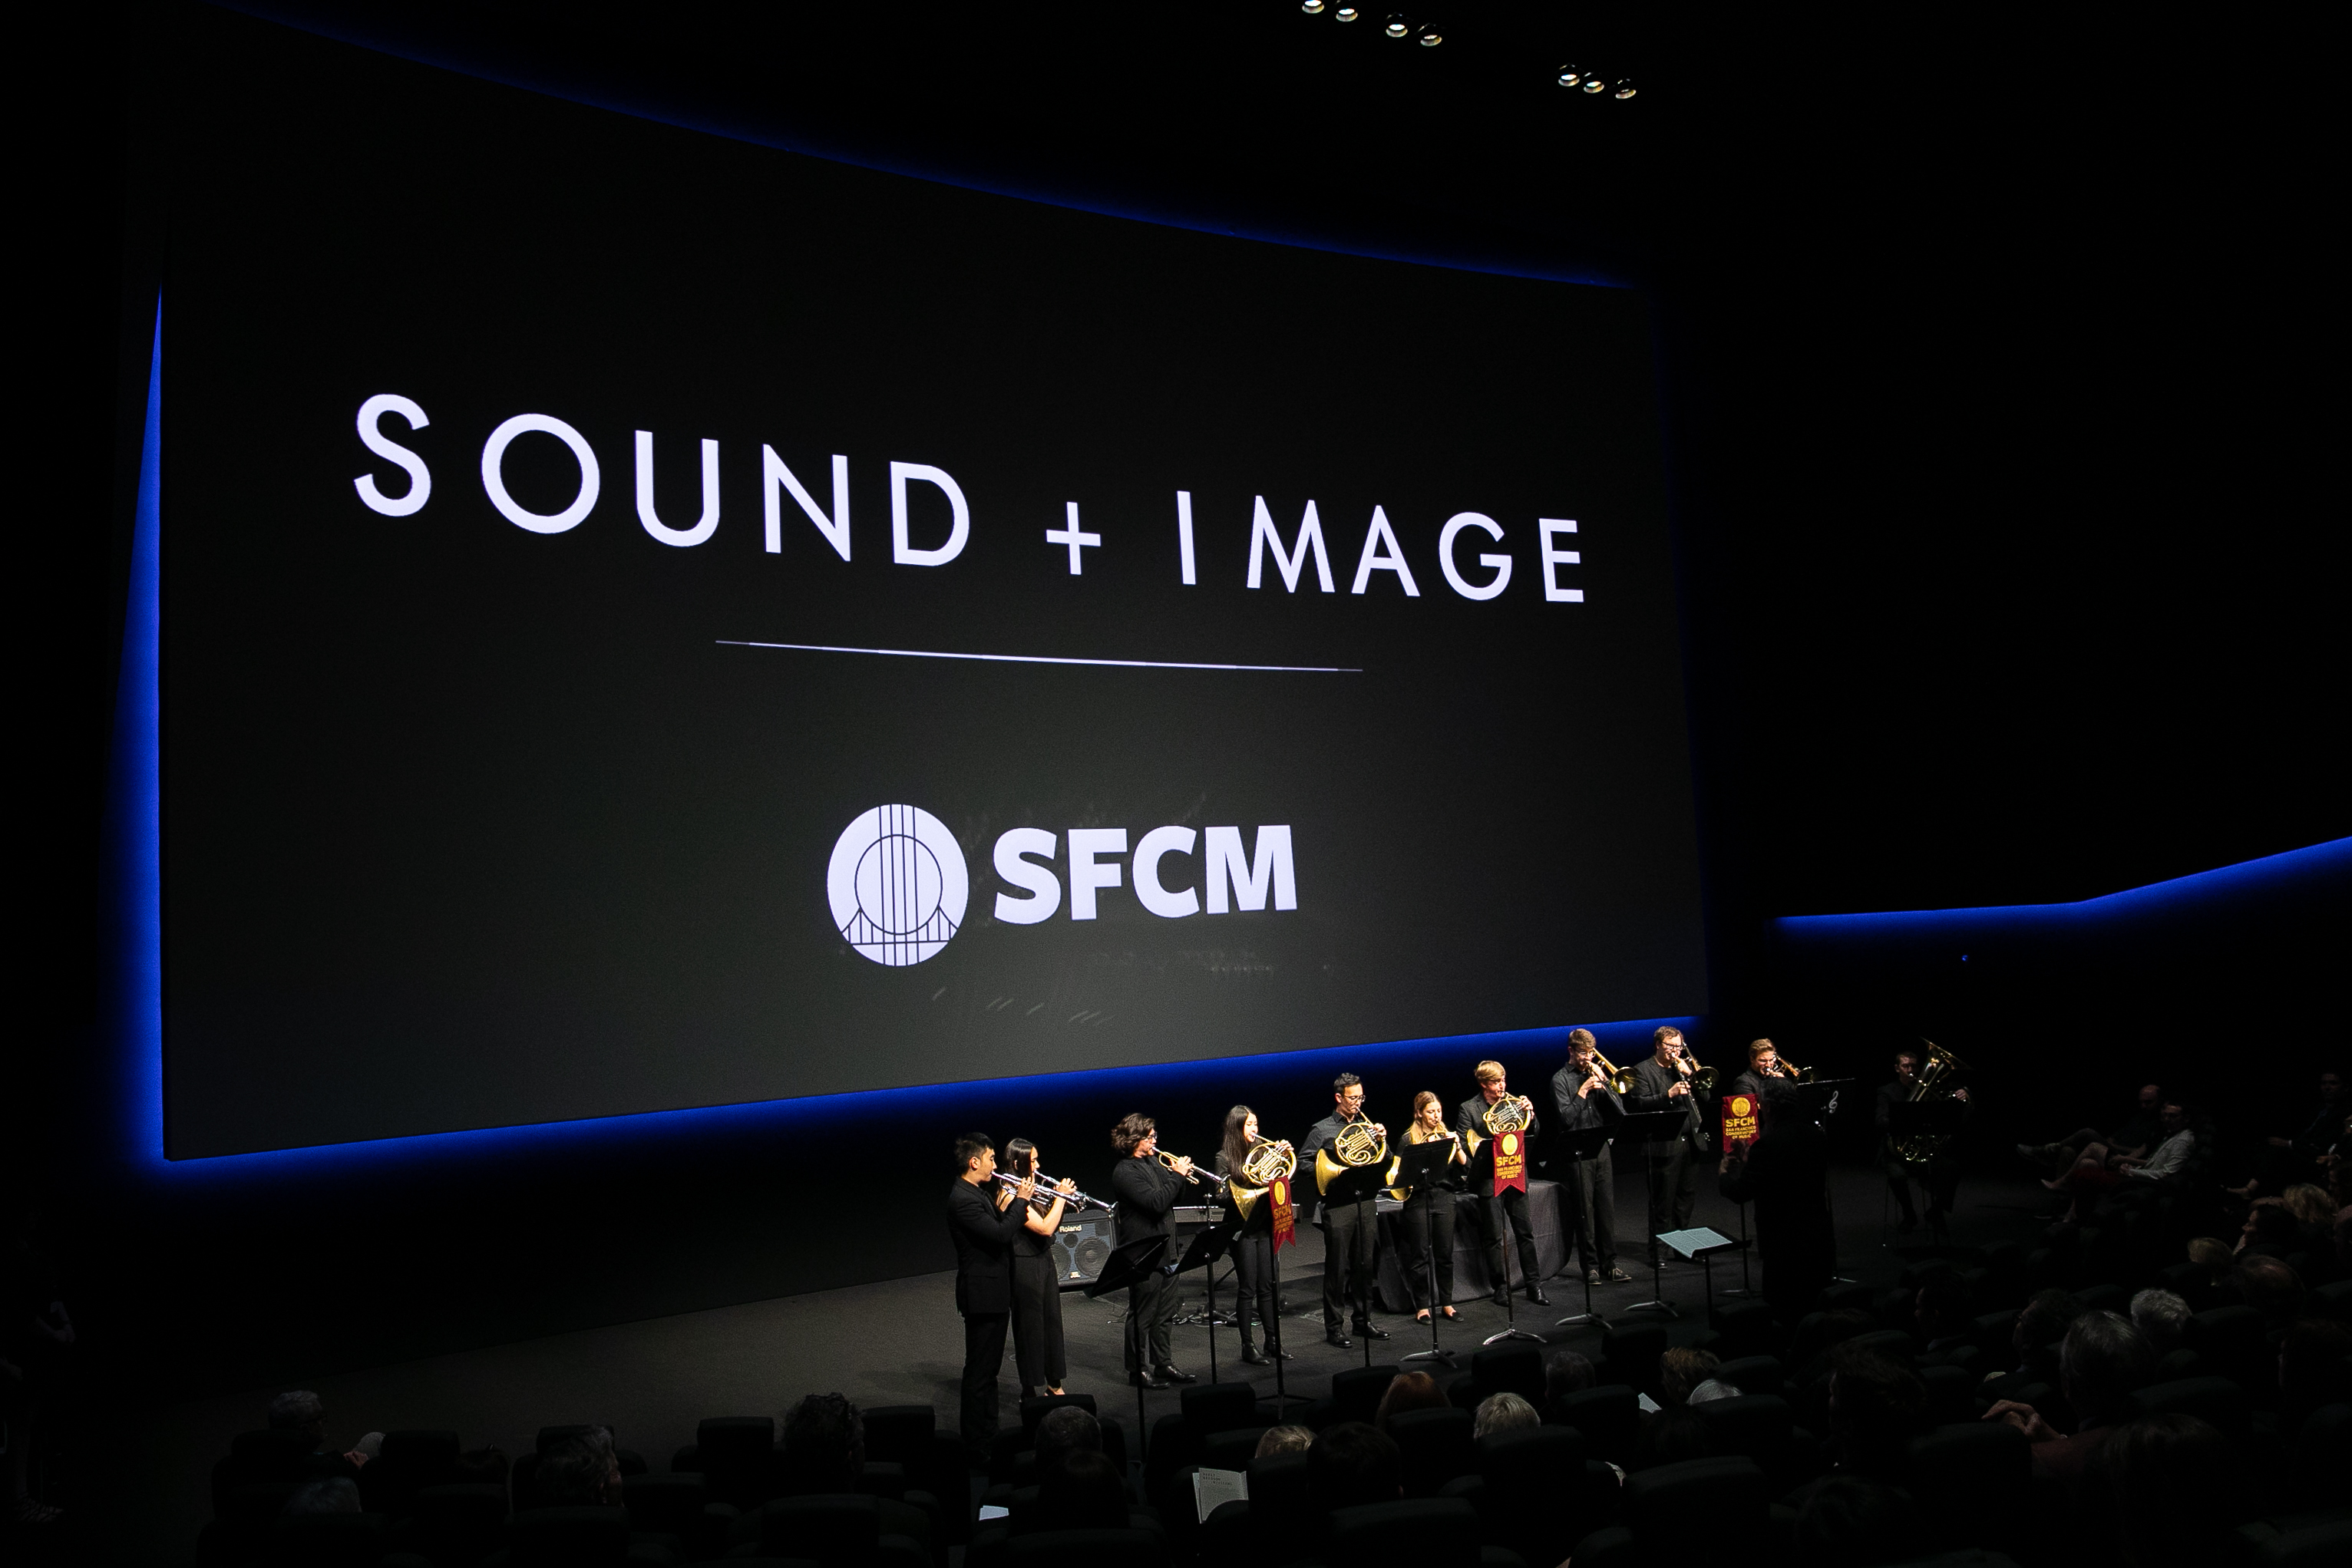 SOUND + IMAGE Gala at Dolby Theater